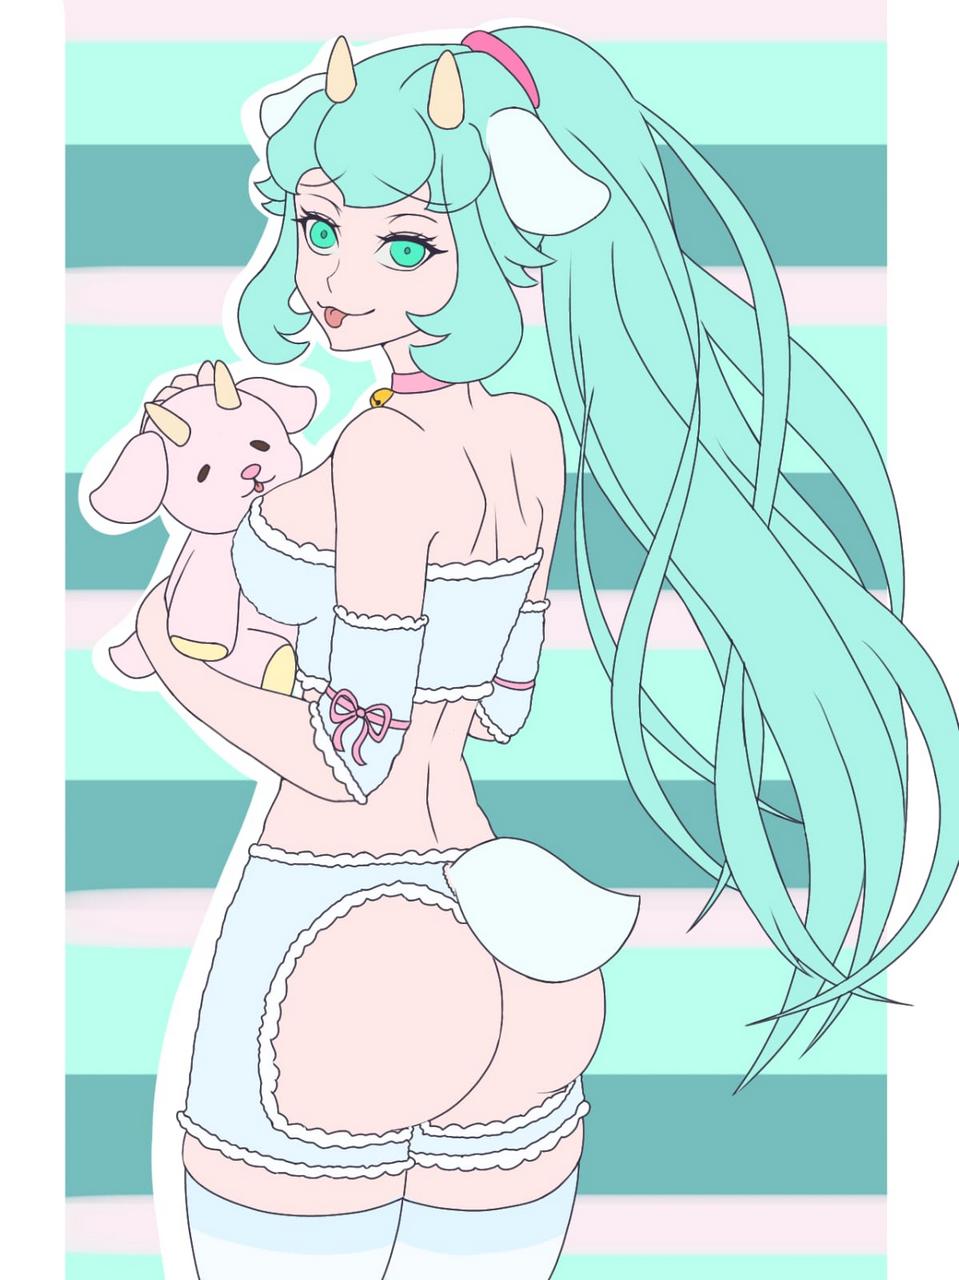 Baph Goat Girl Made By Niuniutd On Instagram